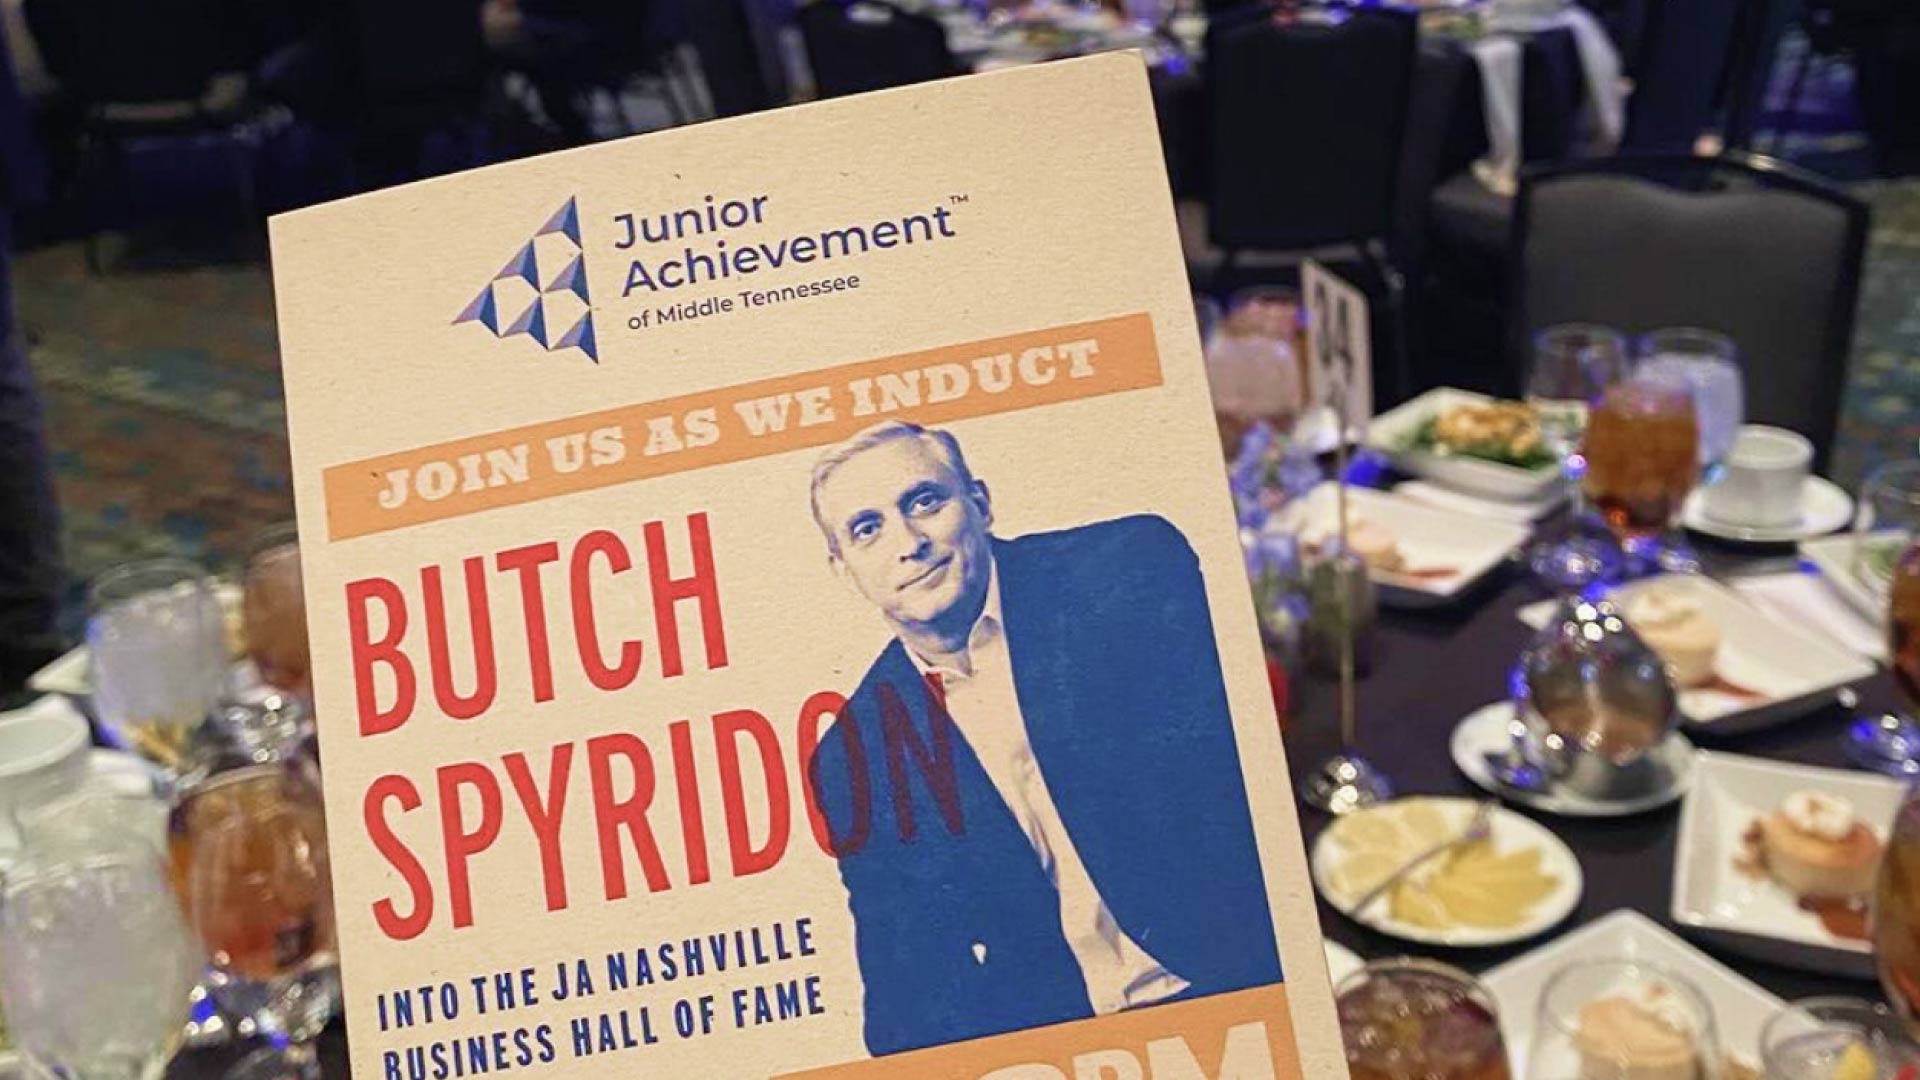 Photo of the Butch Spyridon brochure with table setting from the event in the background